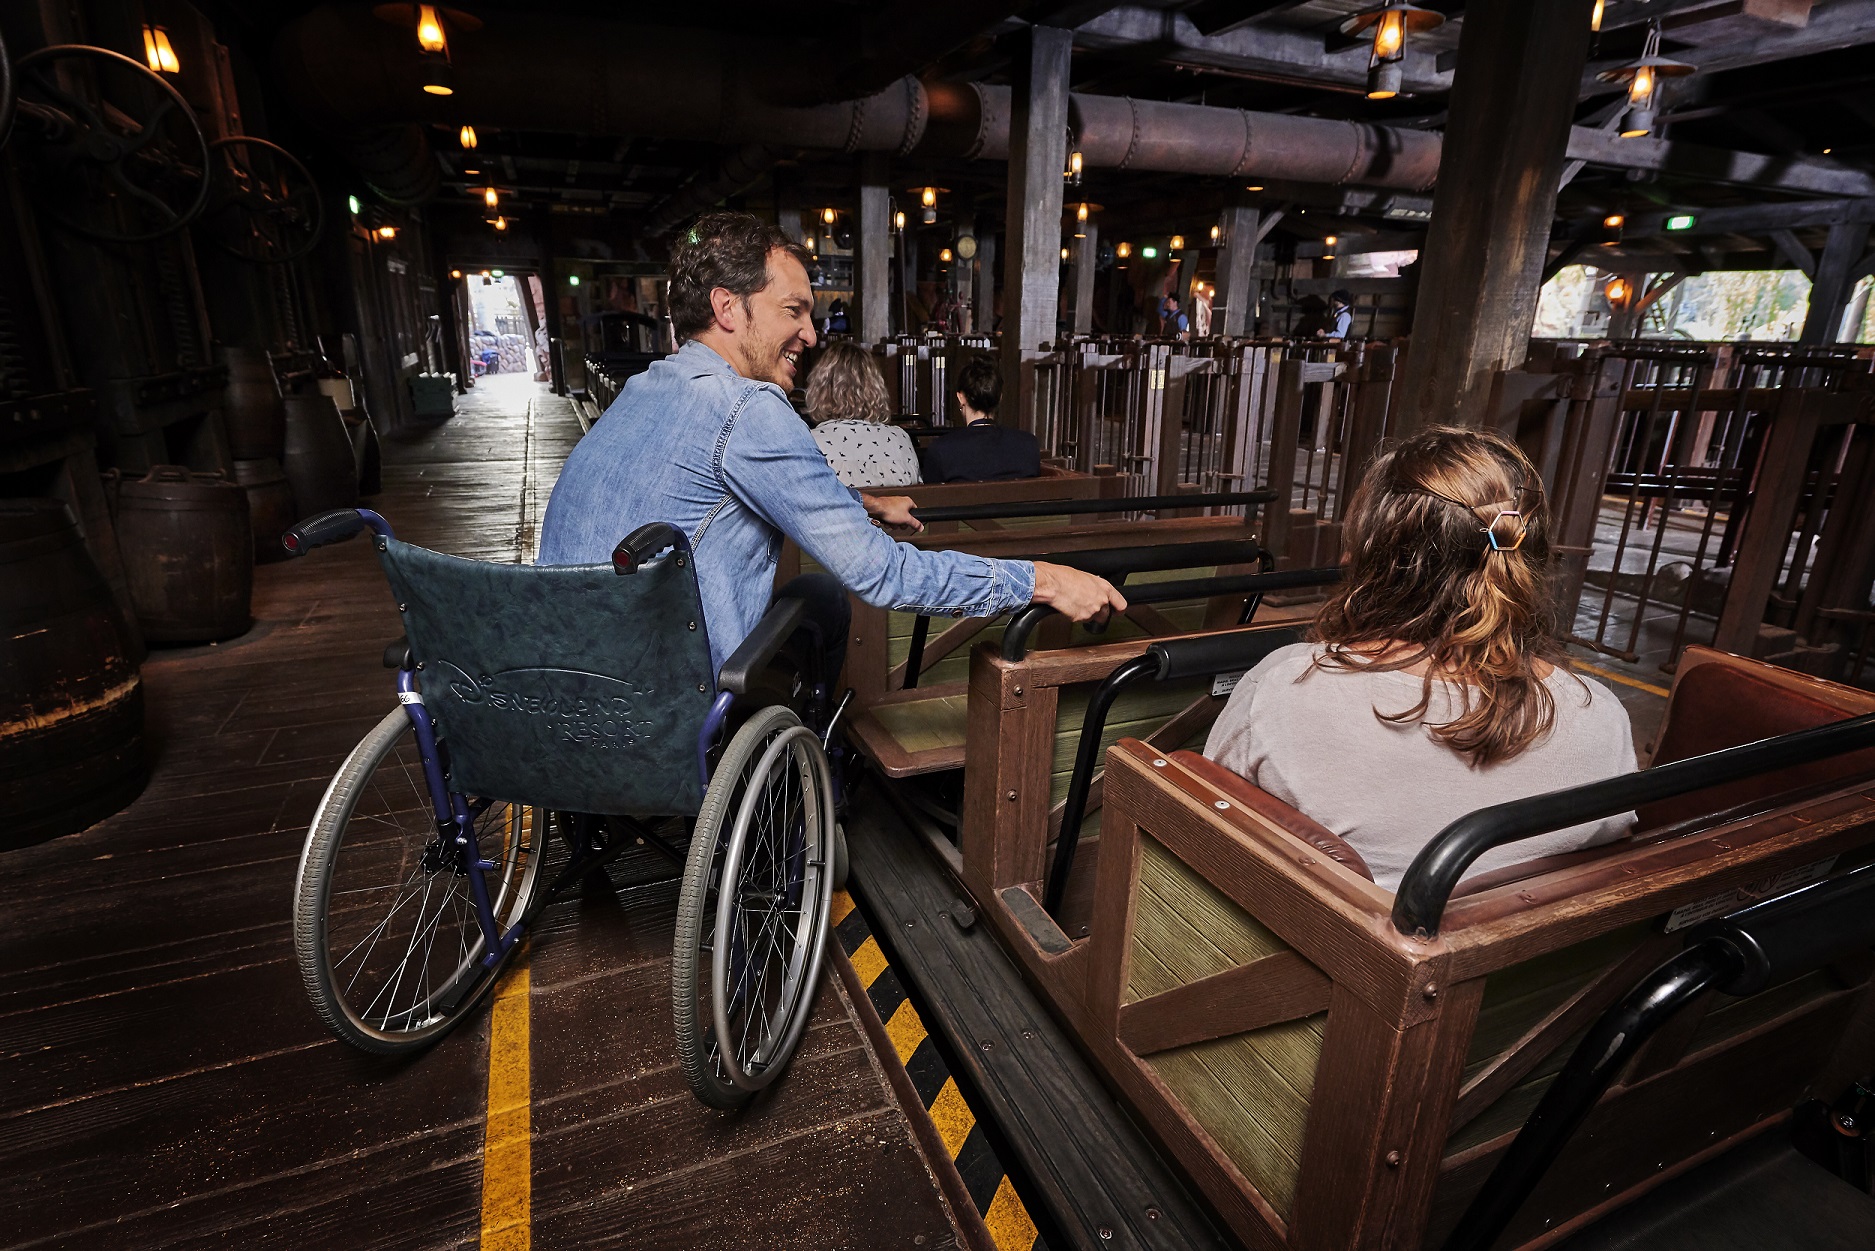 INTERNATIONAL DAY OF PERSONS WITH DISABILITIES: 30 YEARS OF ACCESSIBILITY AT DISNEYLAND PARIS